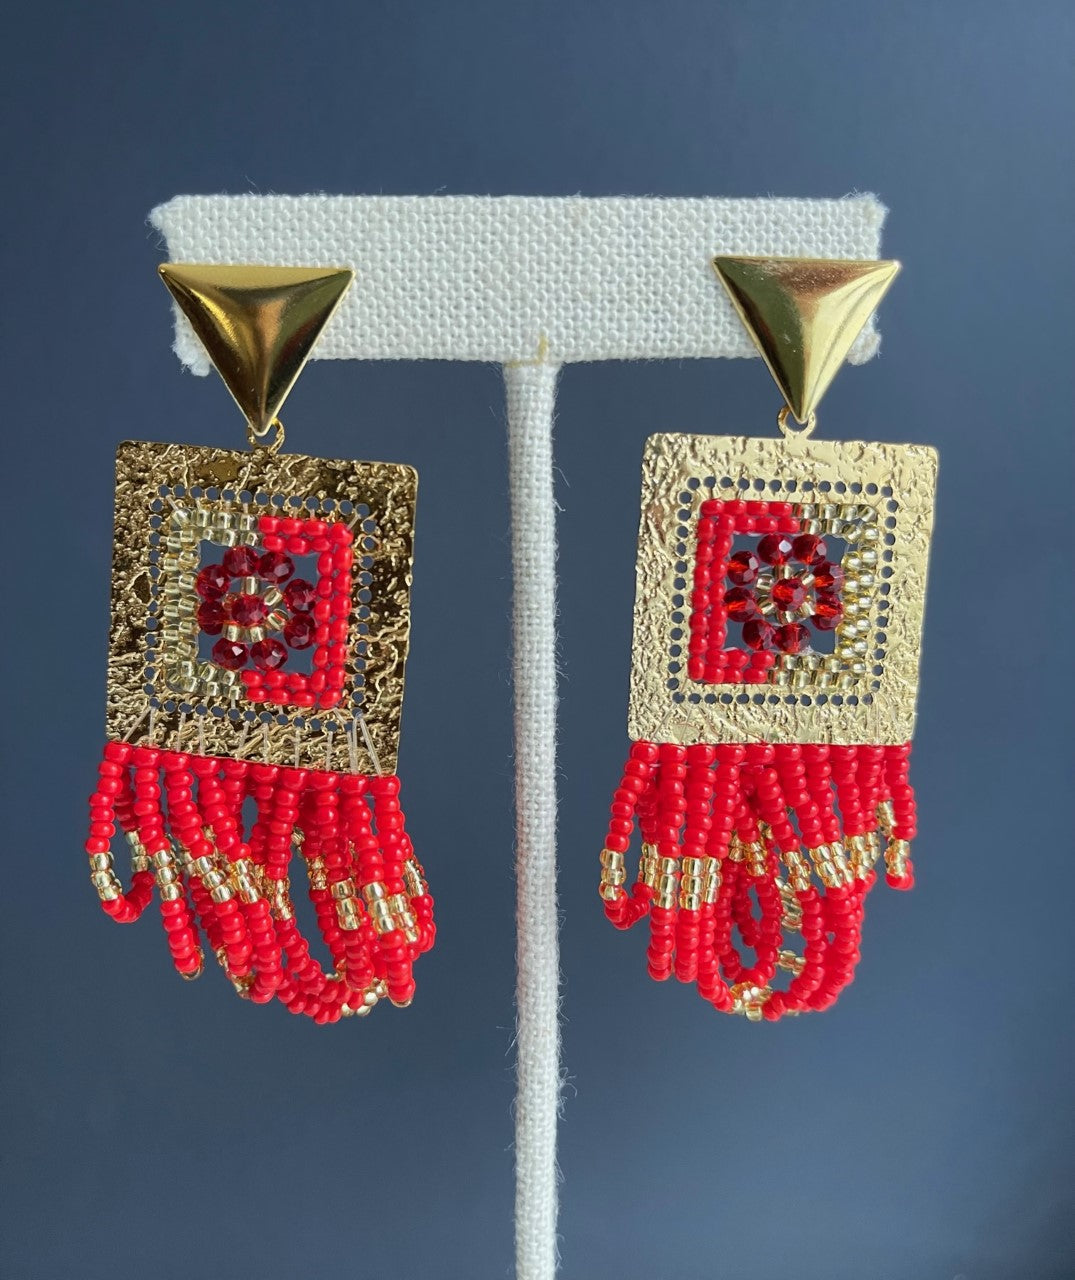 Square Earrings in Gold filled  and Hand-Knitted  with Chakiras